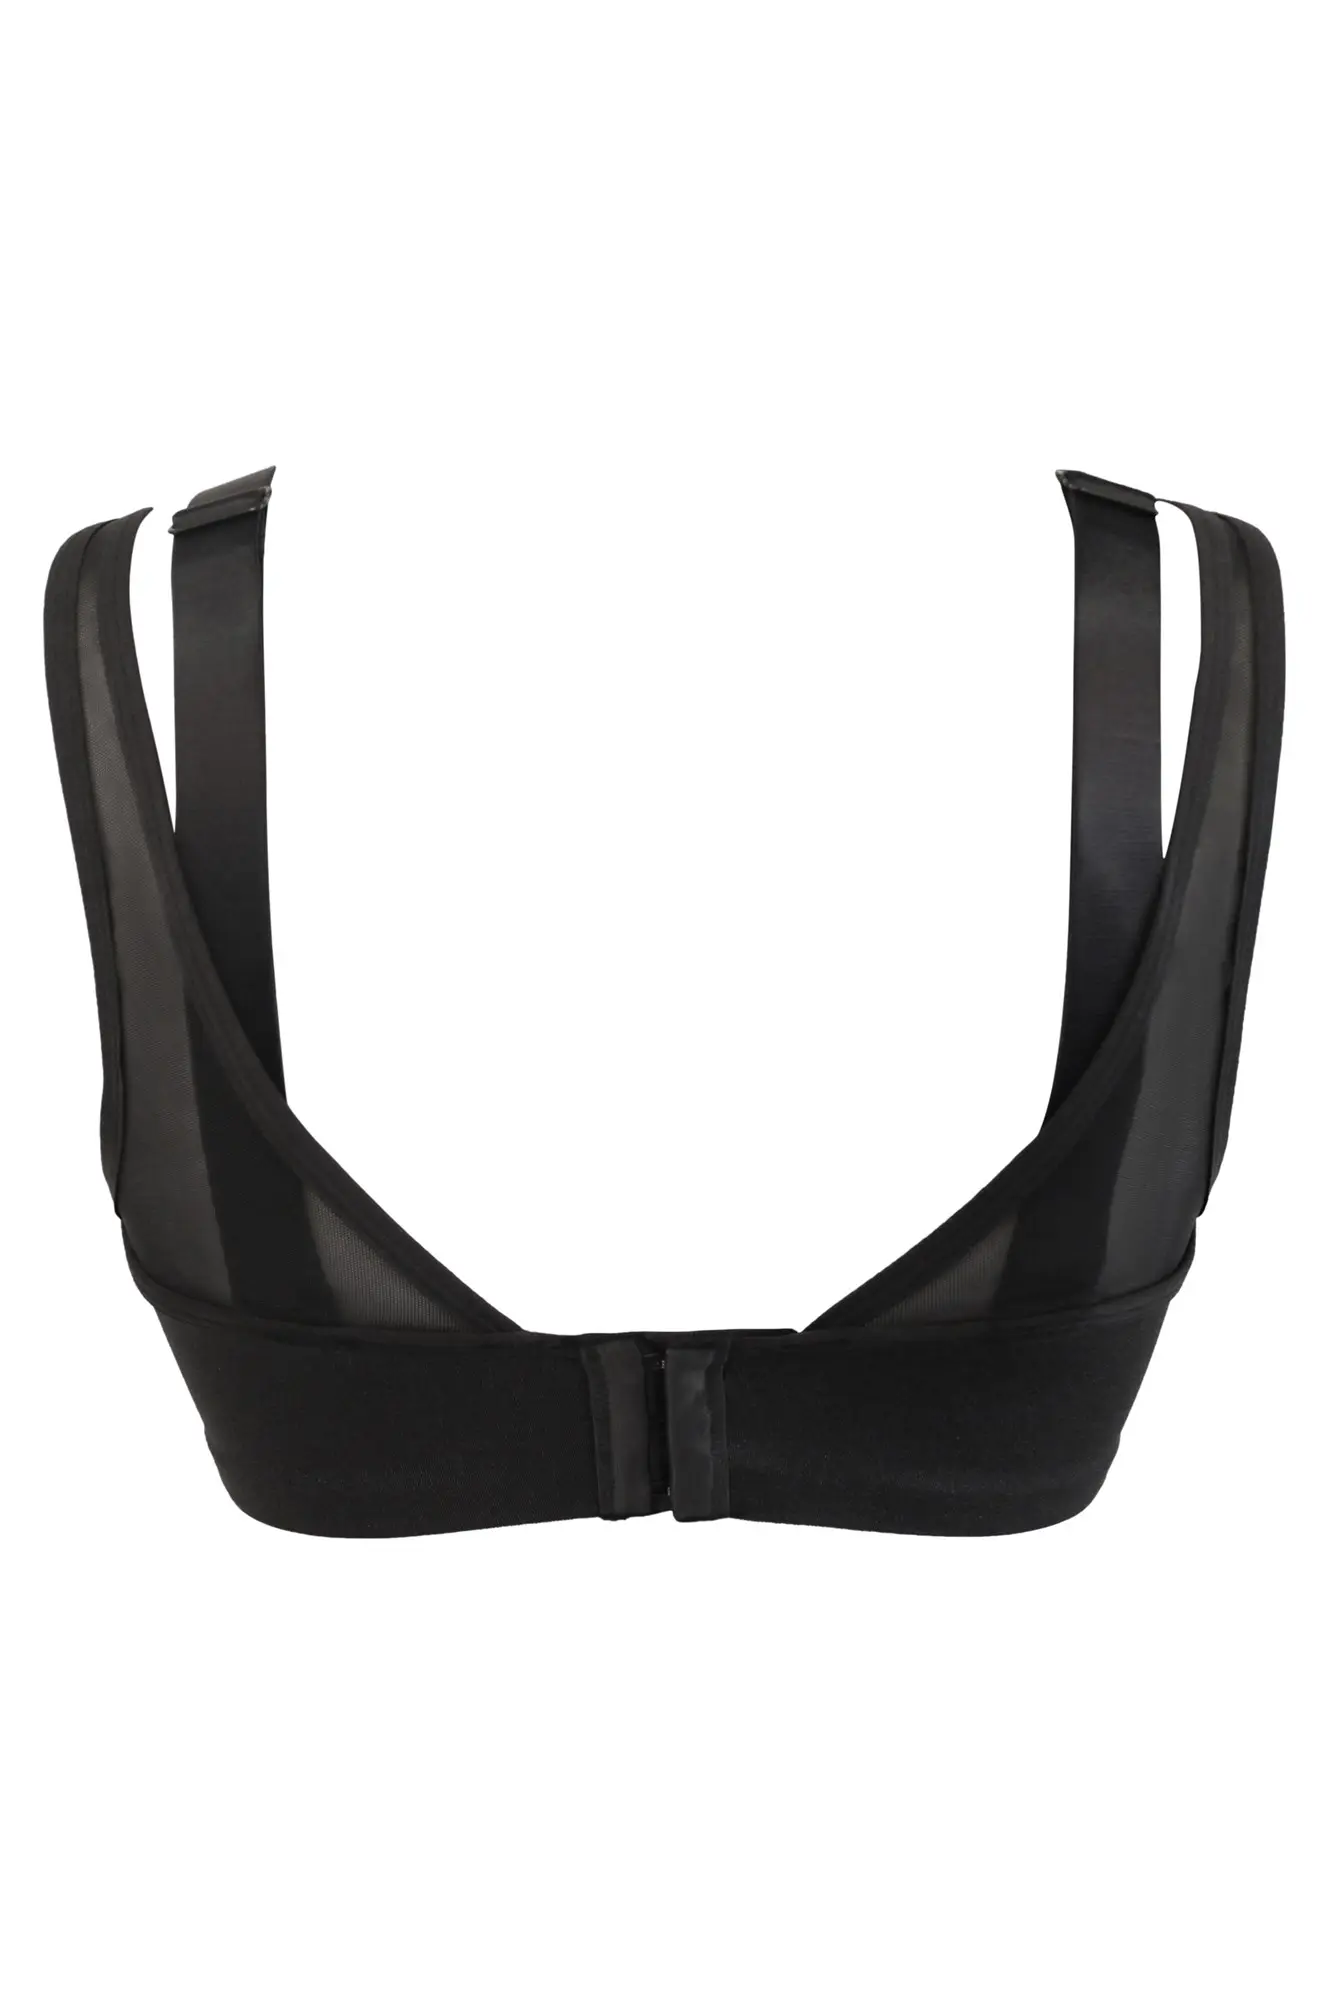 enflame Set of 2 Sports Bustier Bra with Cups